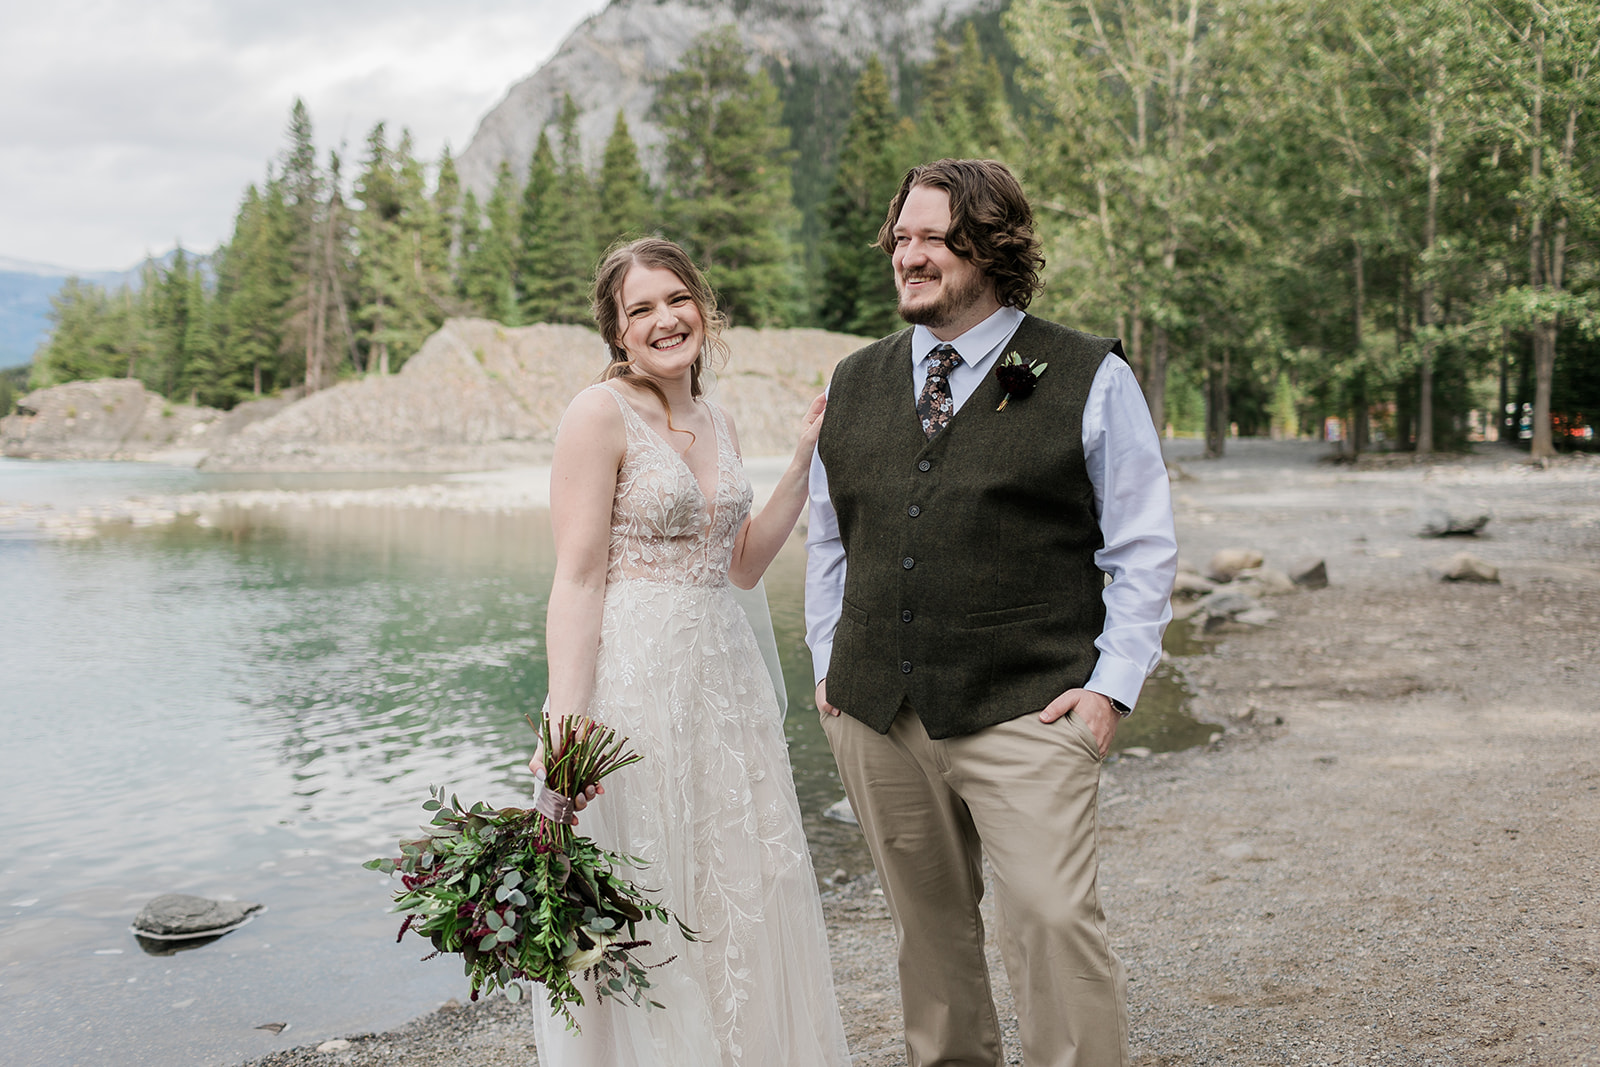 Bride and Groom wedding photos in Banff, Alberta by Jess Collins